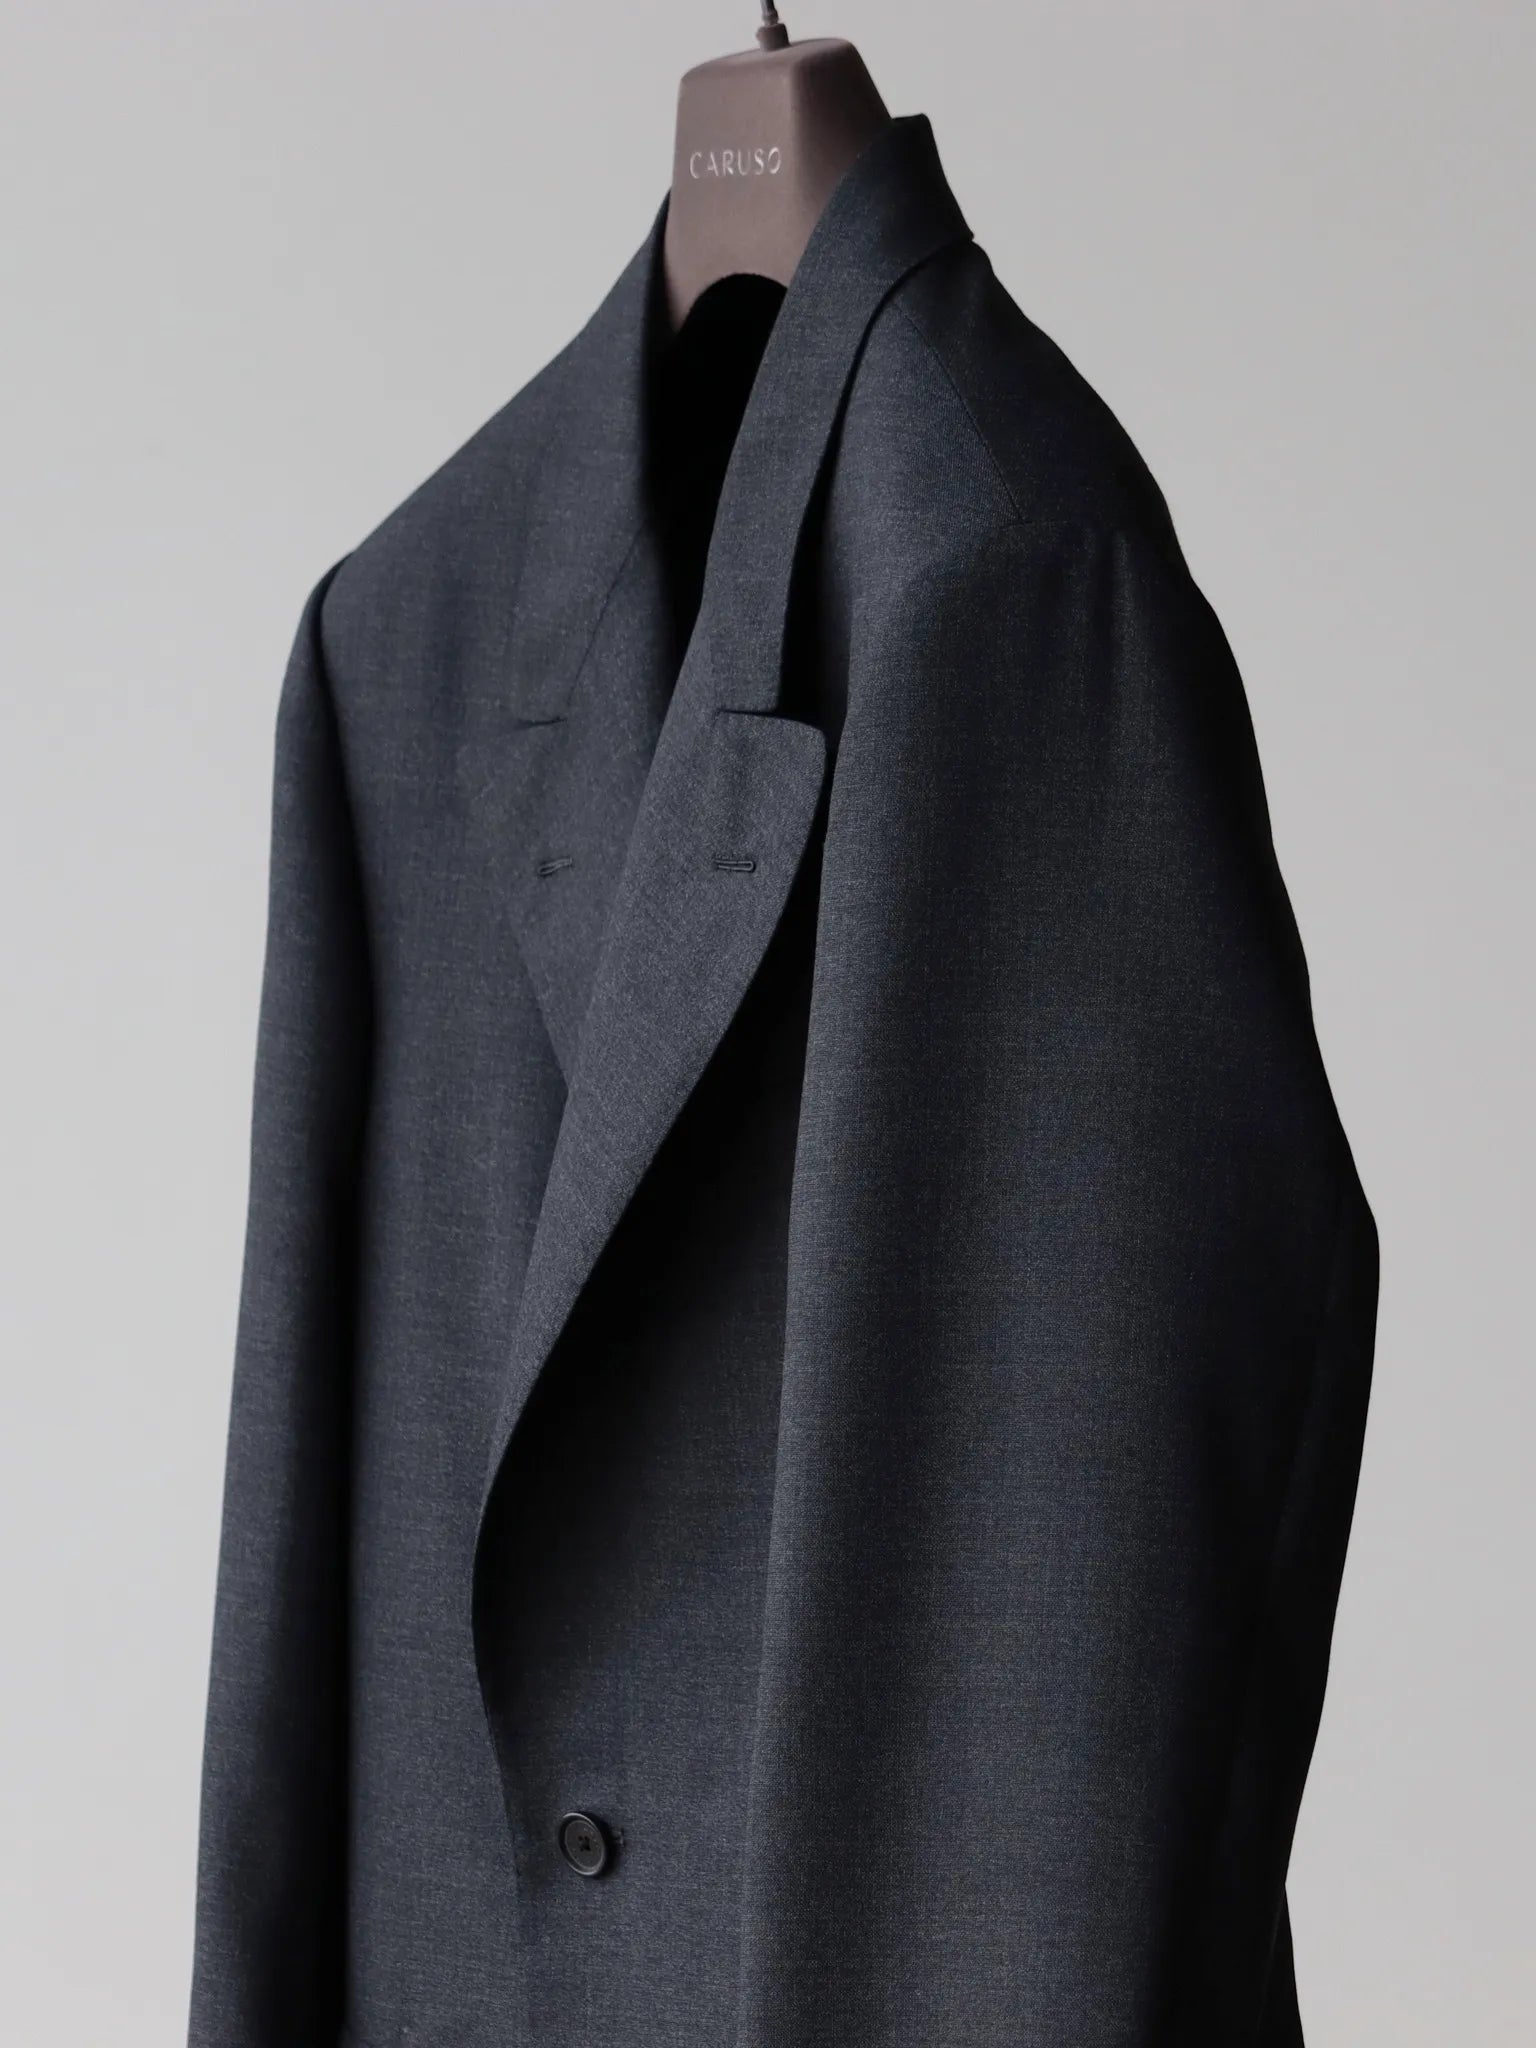 neat-caruso-neat-solid-double-jacket-gray-2